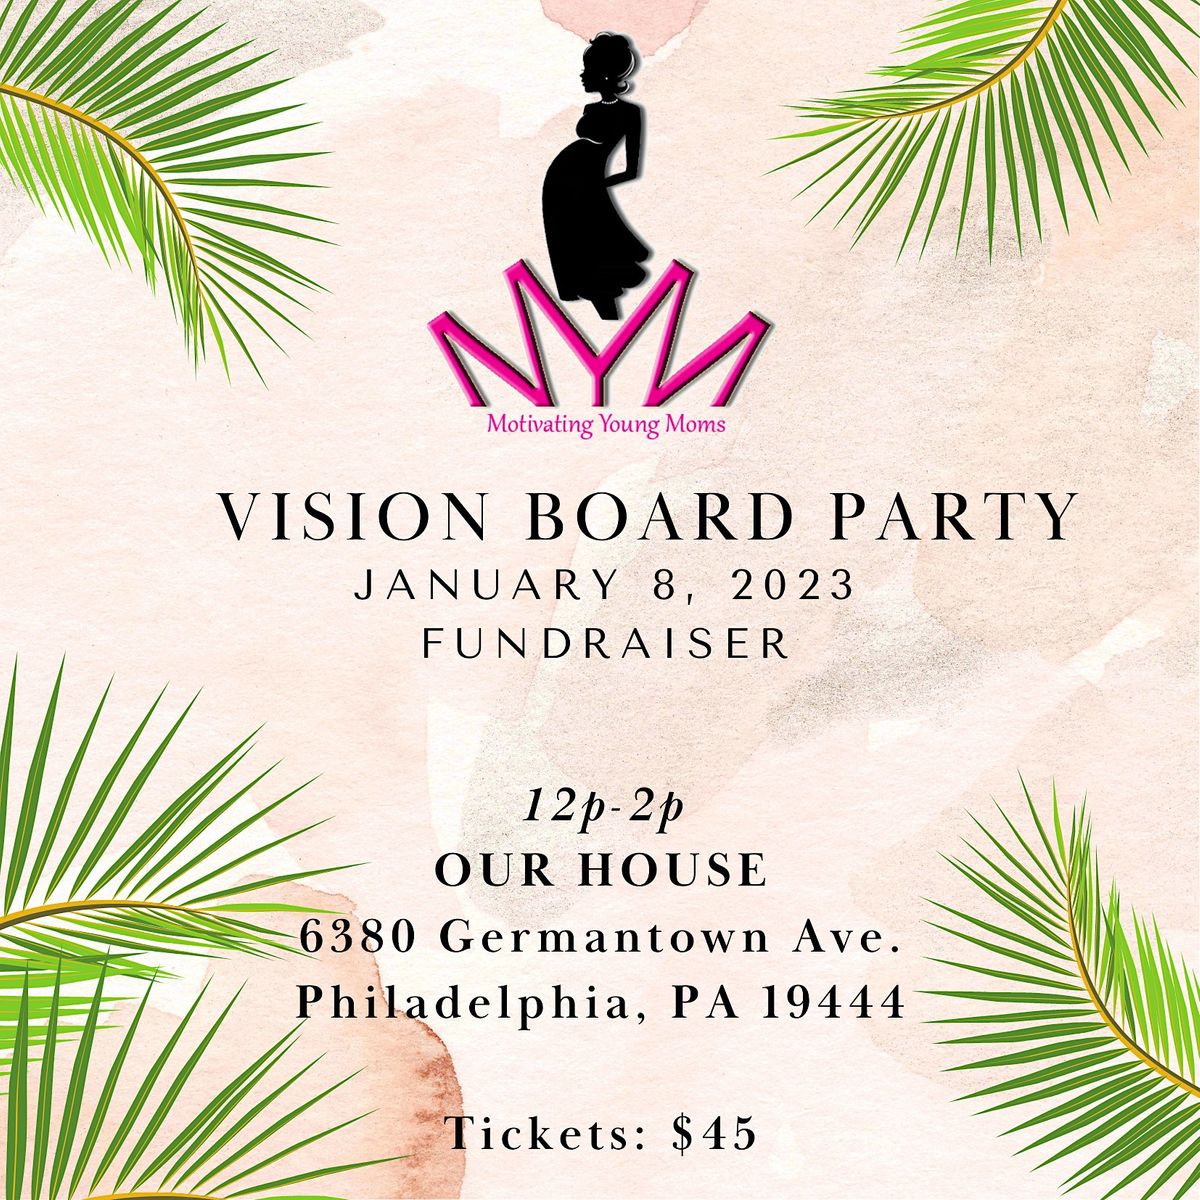 VISION BOARD PARTY | Our House Culture Center, Philadelphia, PA ...